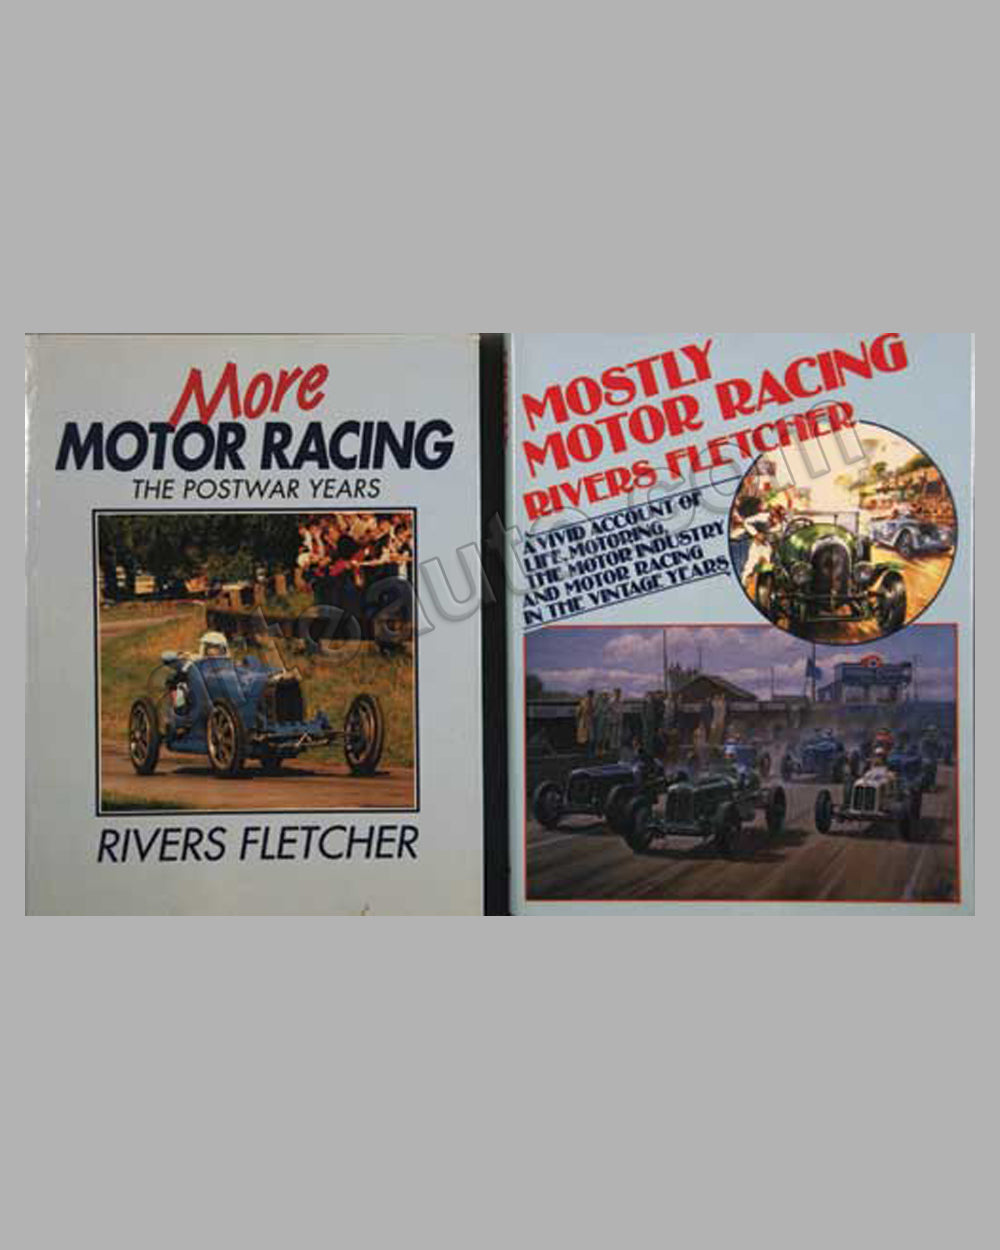 Motor Racing books by R. Fletcher - lot of 2